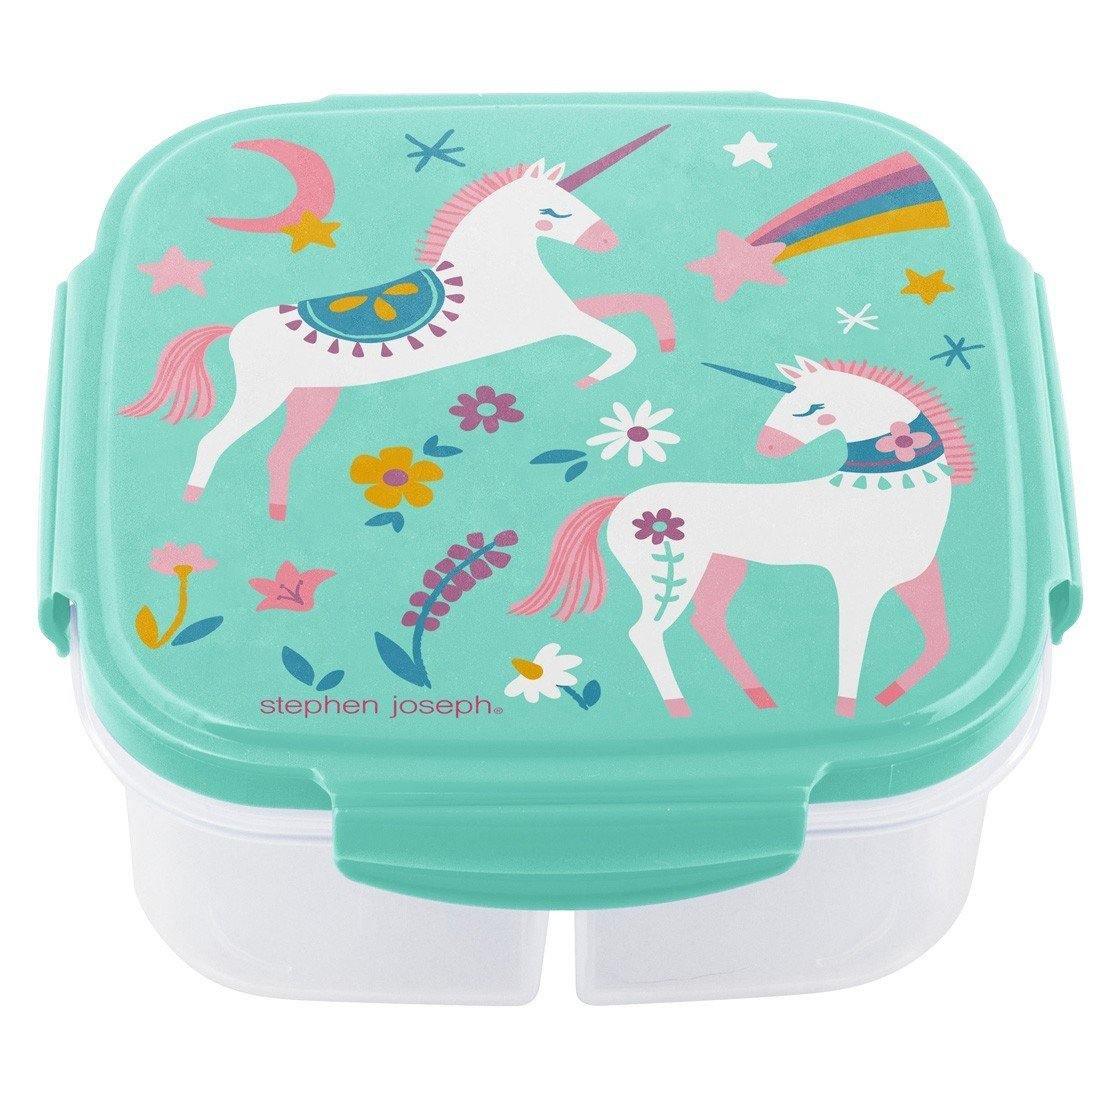 Stephen Joseph Snack Box With Ice Pack Unicorn - BumbleToys - 2-4 Years, 5-7 Years, Cecil, Girls, Lunch Box, School Supplies, Snak Box